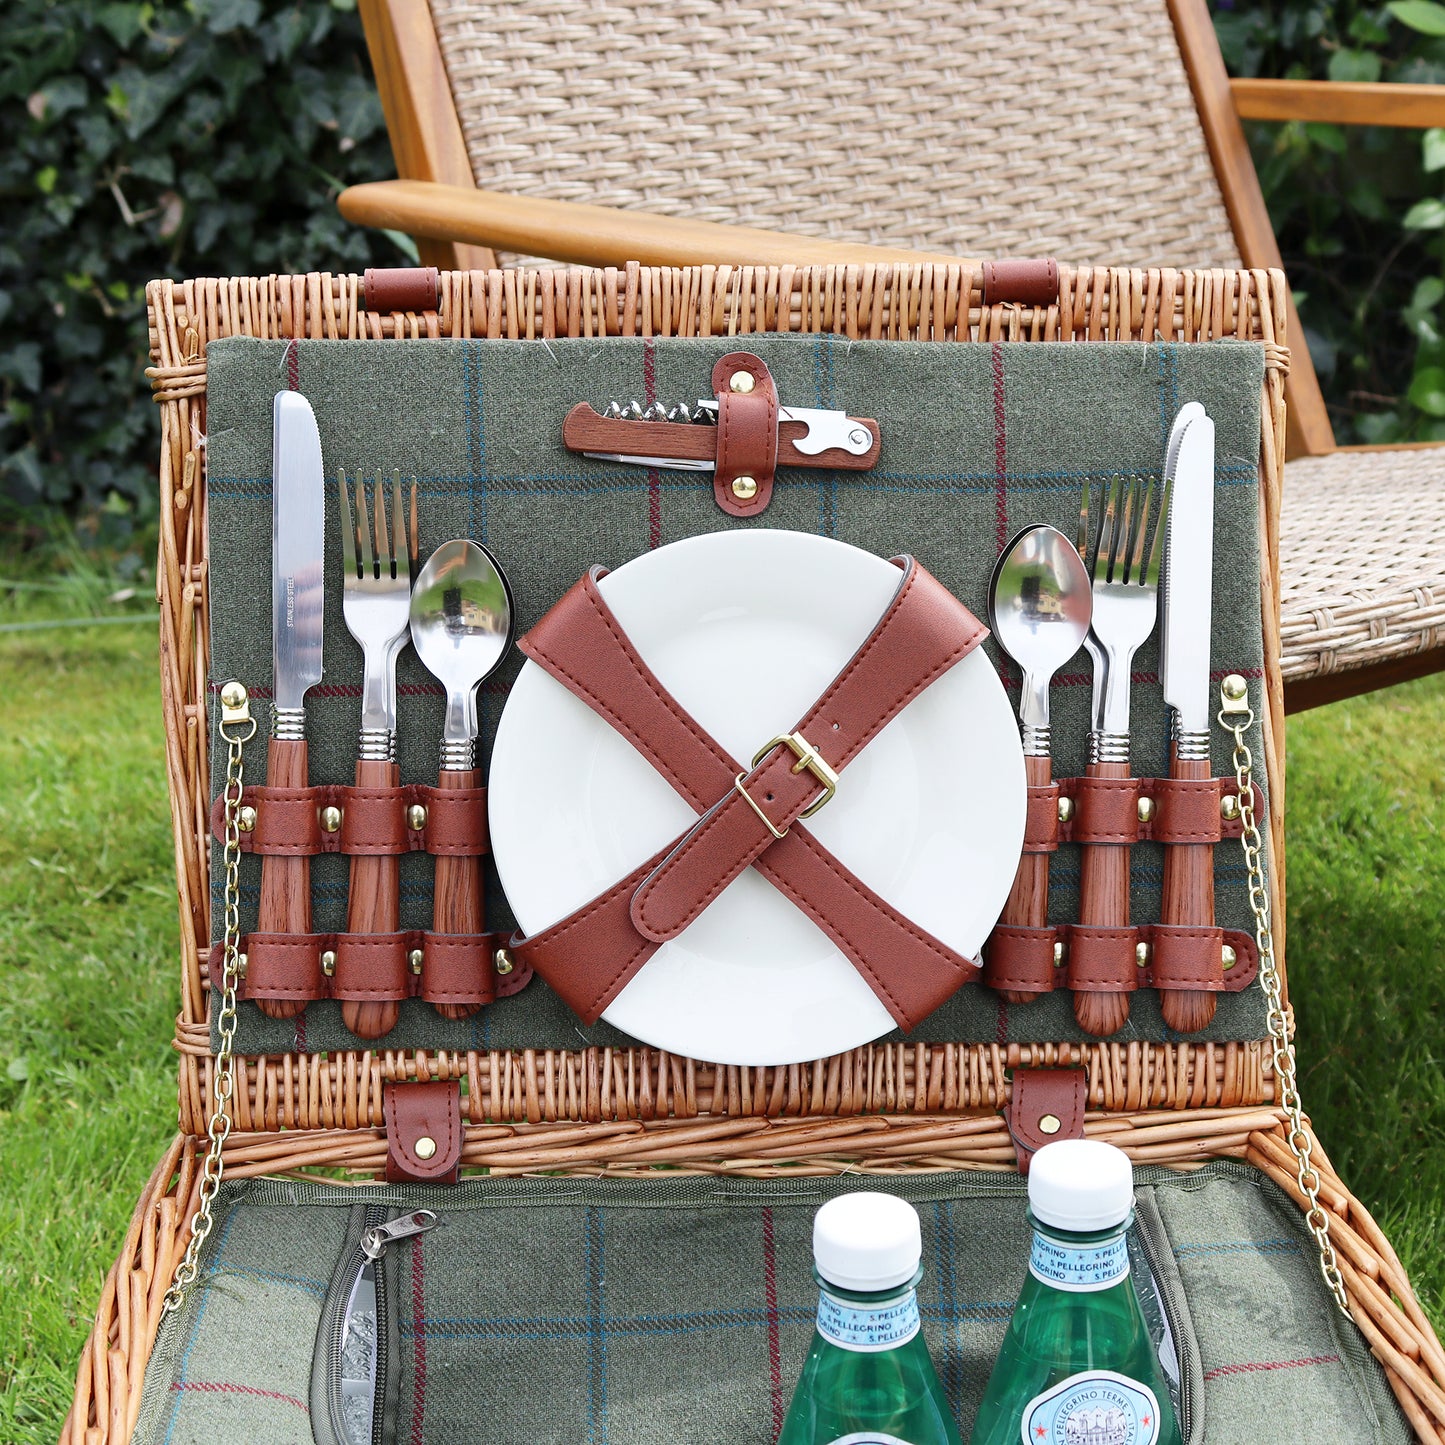 4 Person Fitted Green Tweed Wicker Picnic Basket